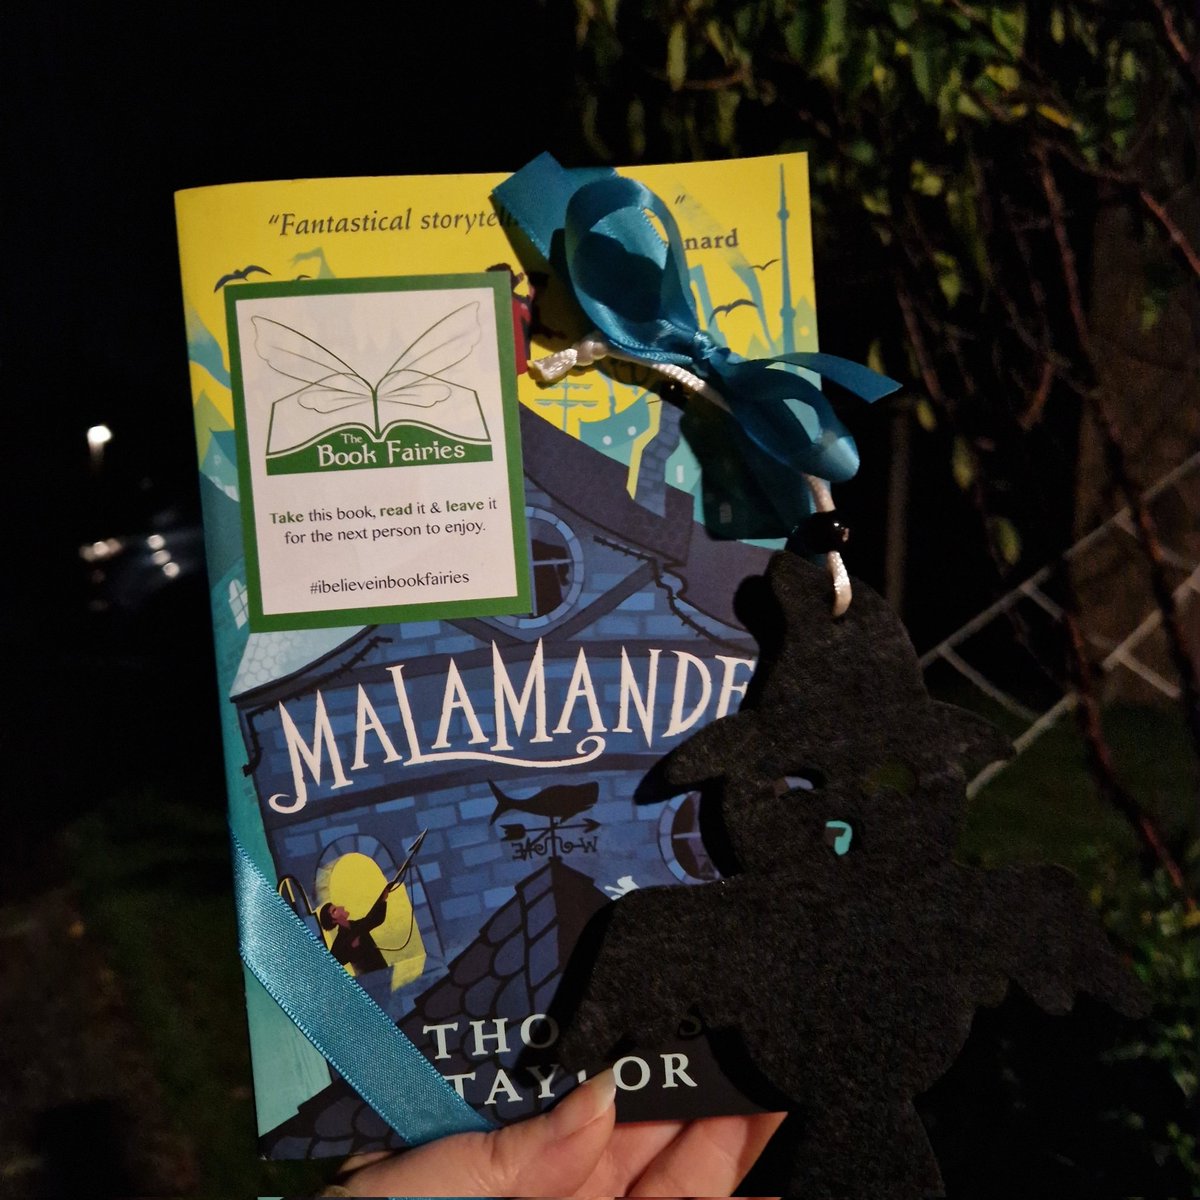 The Book Scaries have left a copy of Thomas Taylor's Malamander in the Little Book House for Halloween. Will you be brave enough to read this eerie-on-sea mystery? #IBelieveInBookFairies #TheBookScaries #LittleFreeLibrary #Dunfermline #Fife